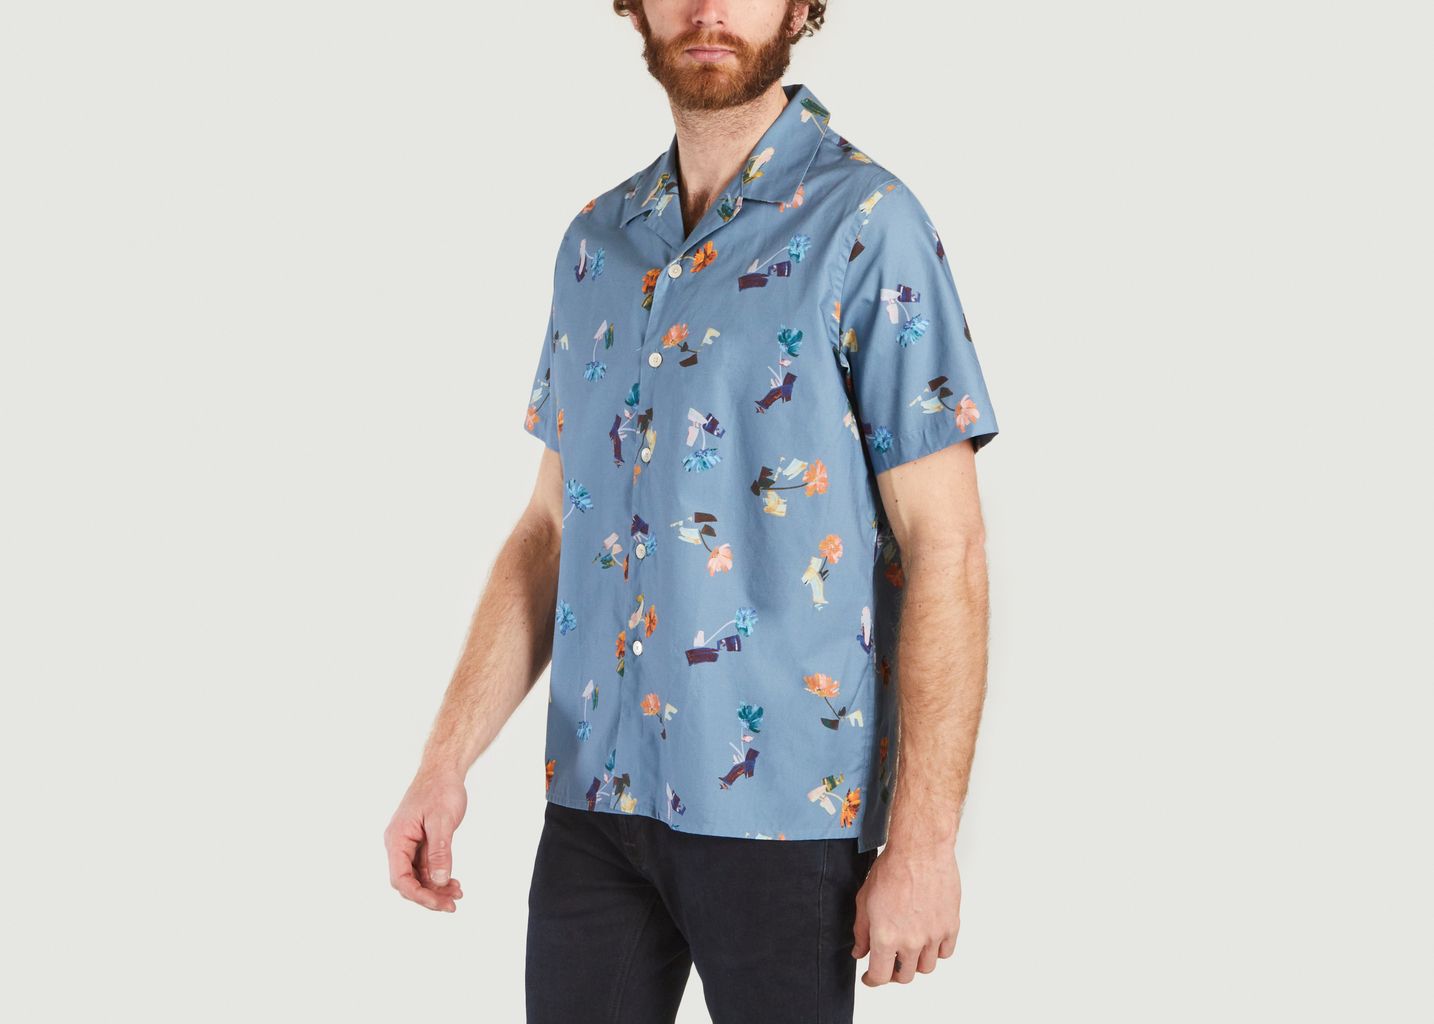 Painted Floral Shirt - PS by PAUL SMITH